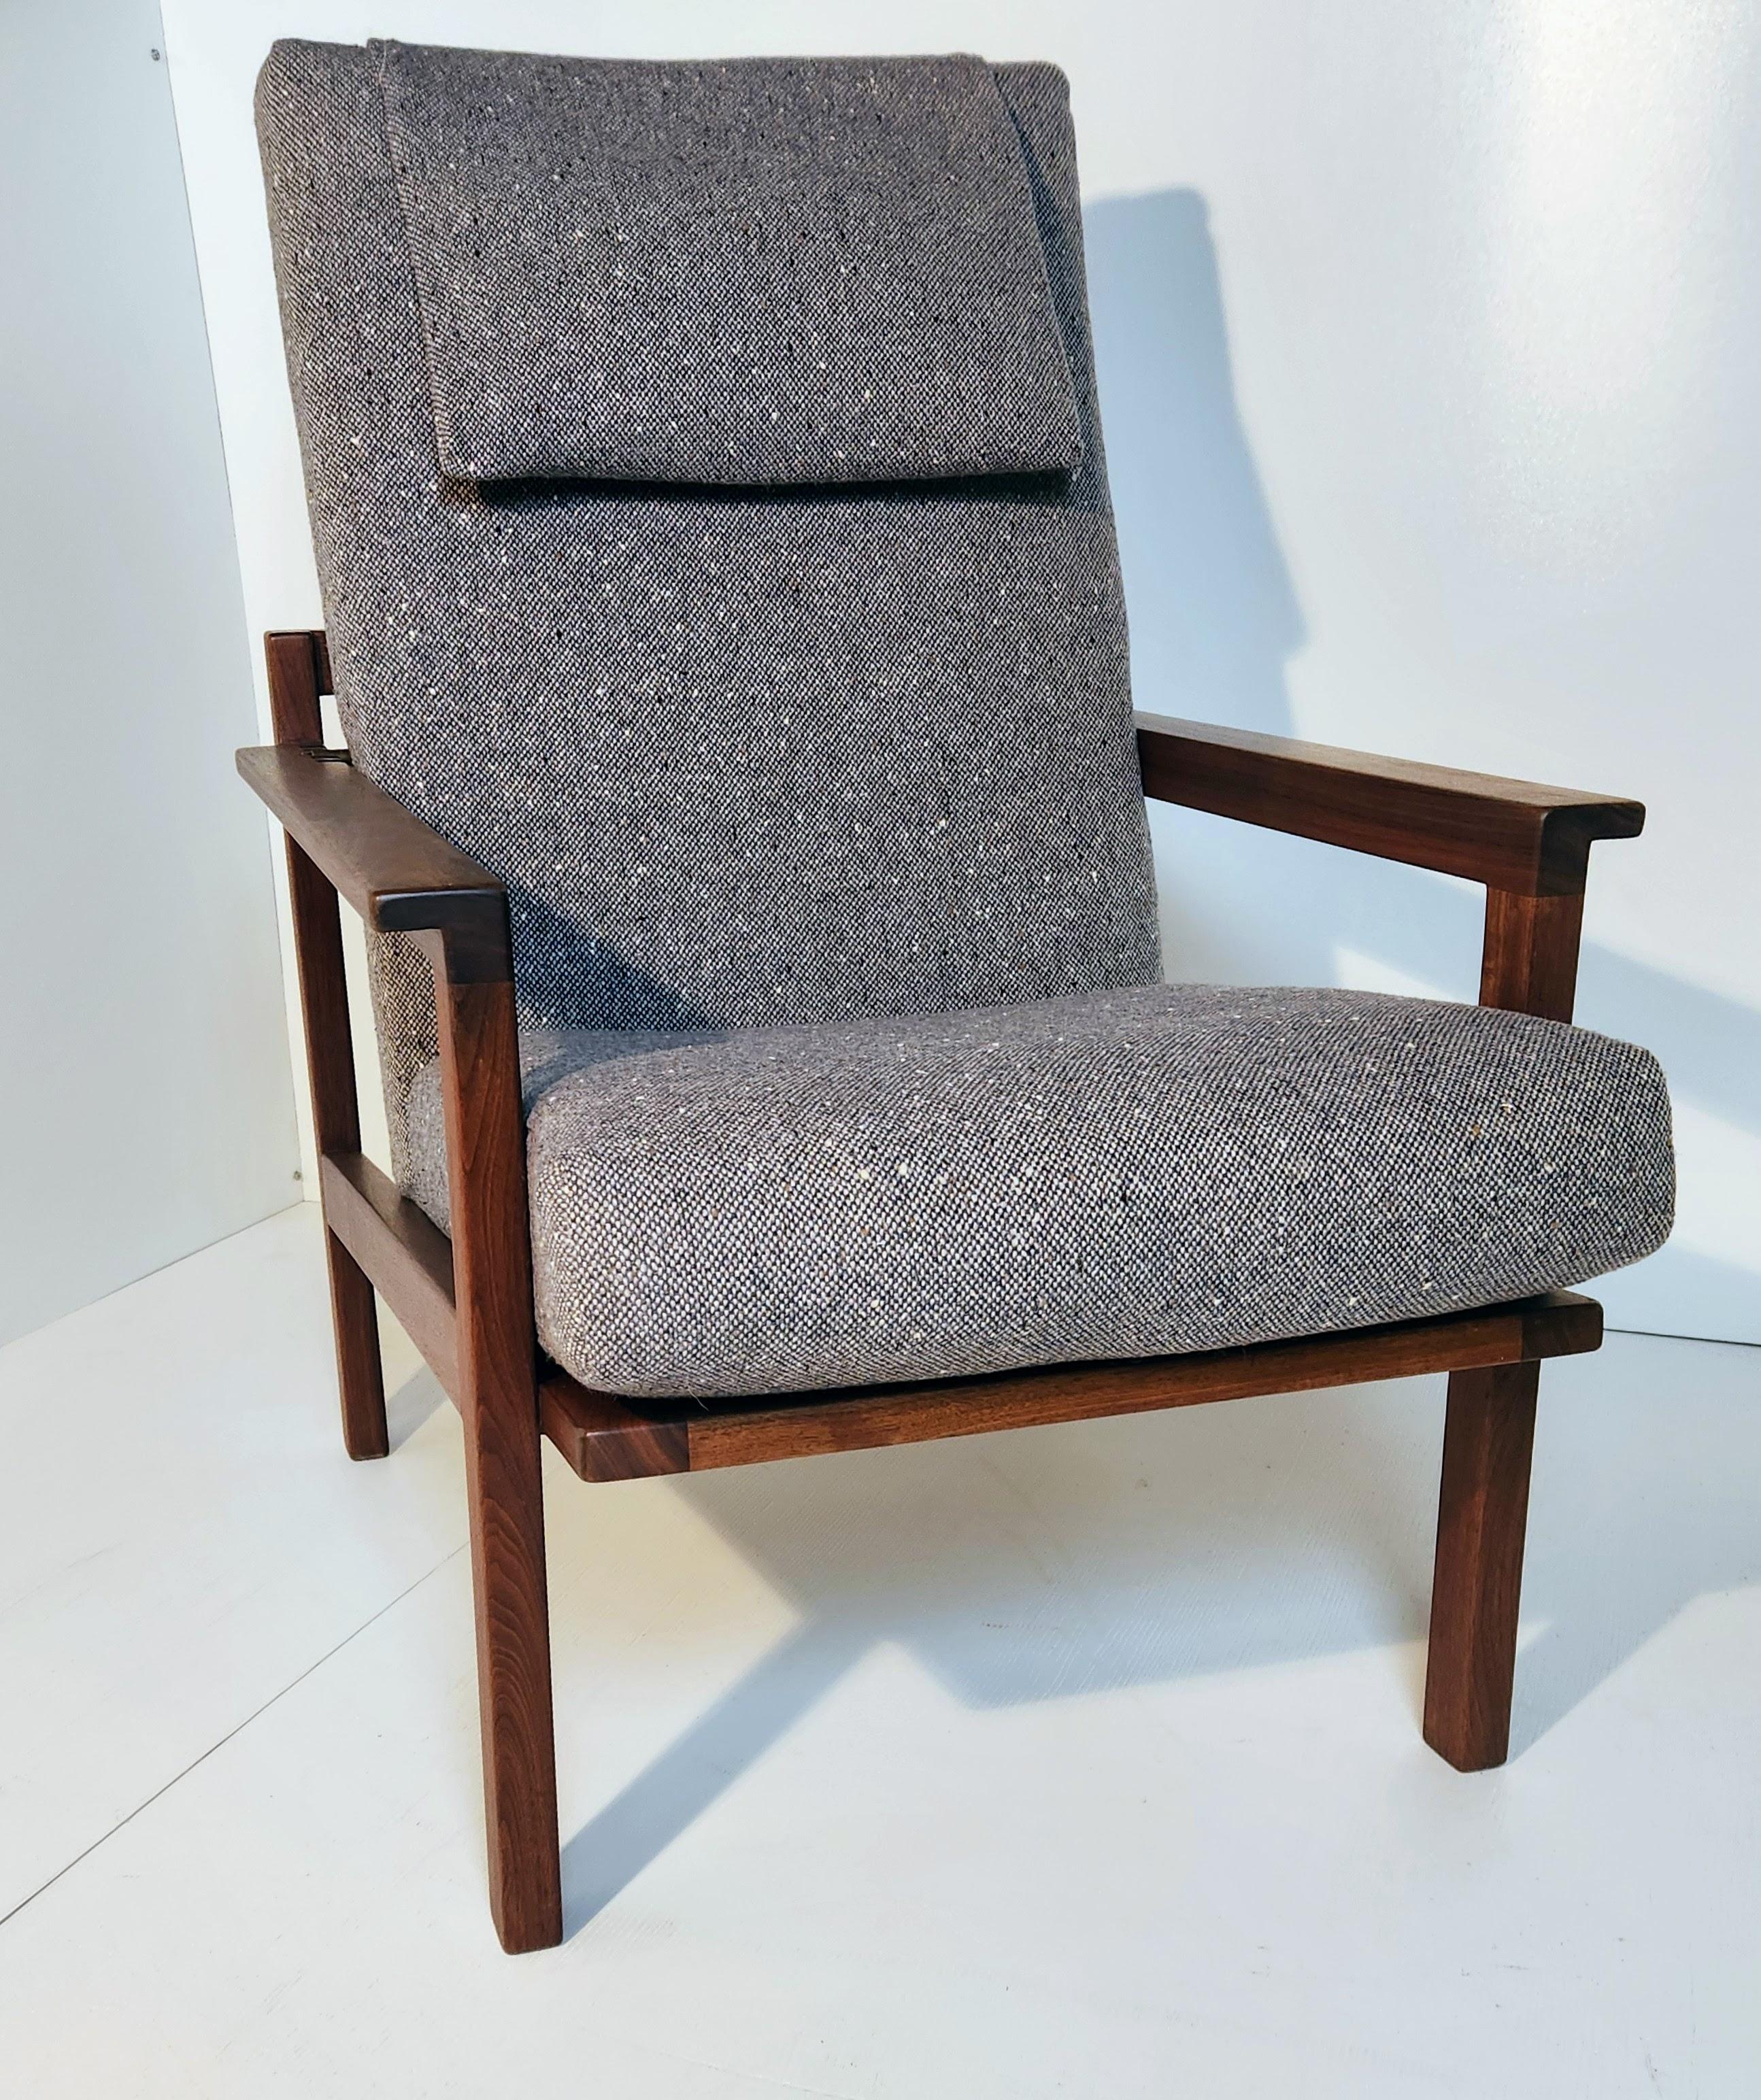 Walnut Adjustable Lounge Chair Arden Riddle (1921-2011) pre-1965 In Good Condition For Sale In Camden, ME